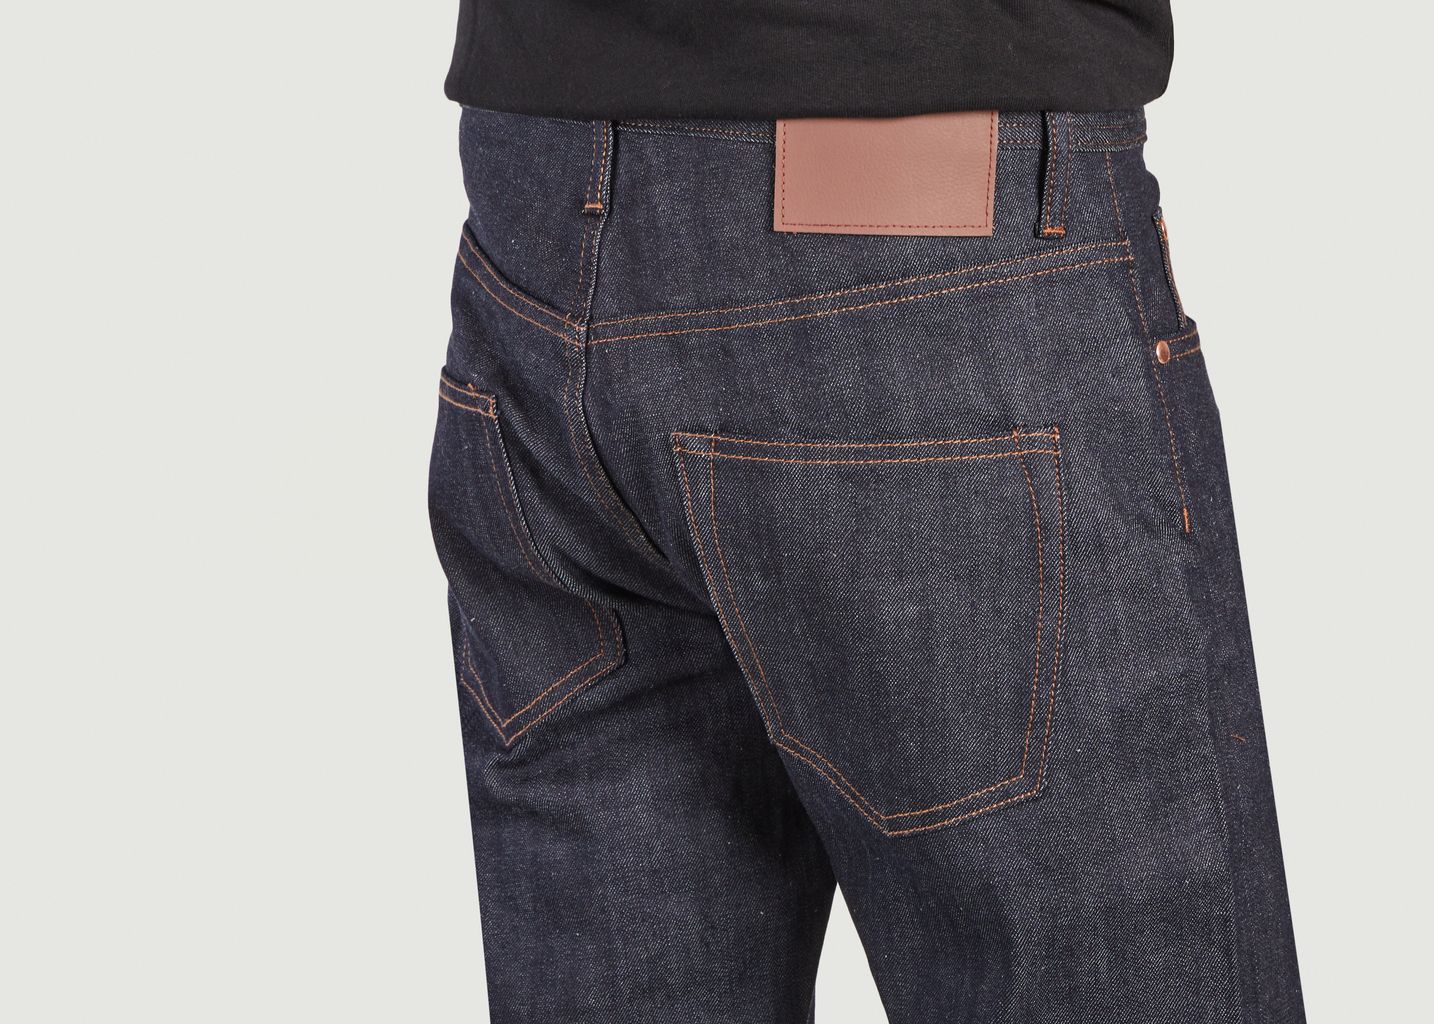 Jean Relaxed Tapered - The Unbranded Brand